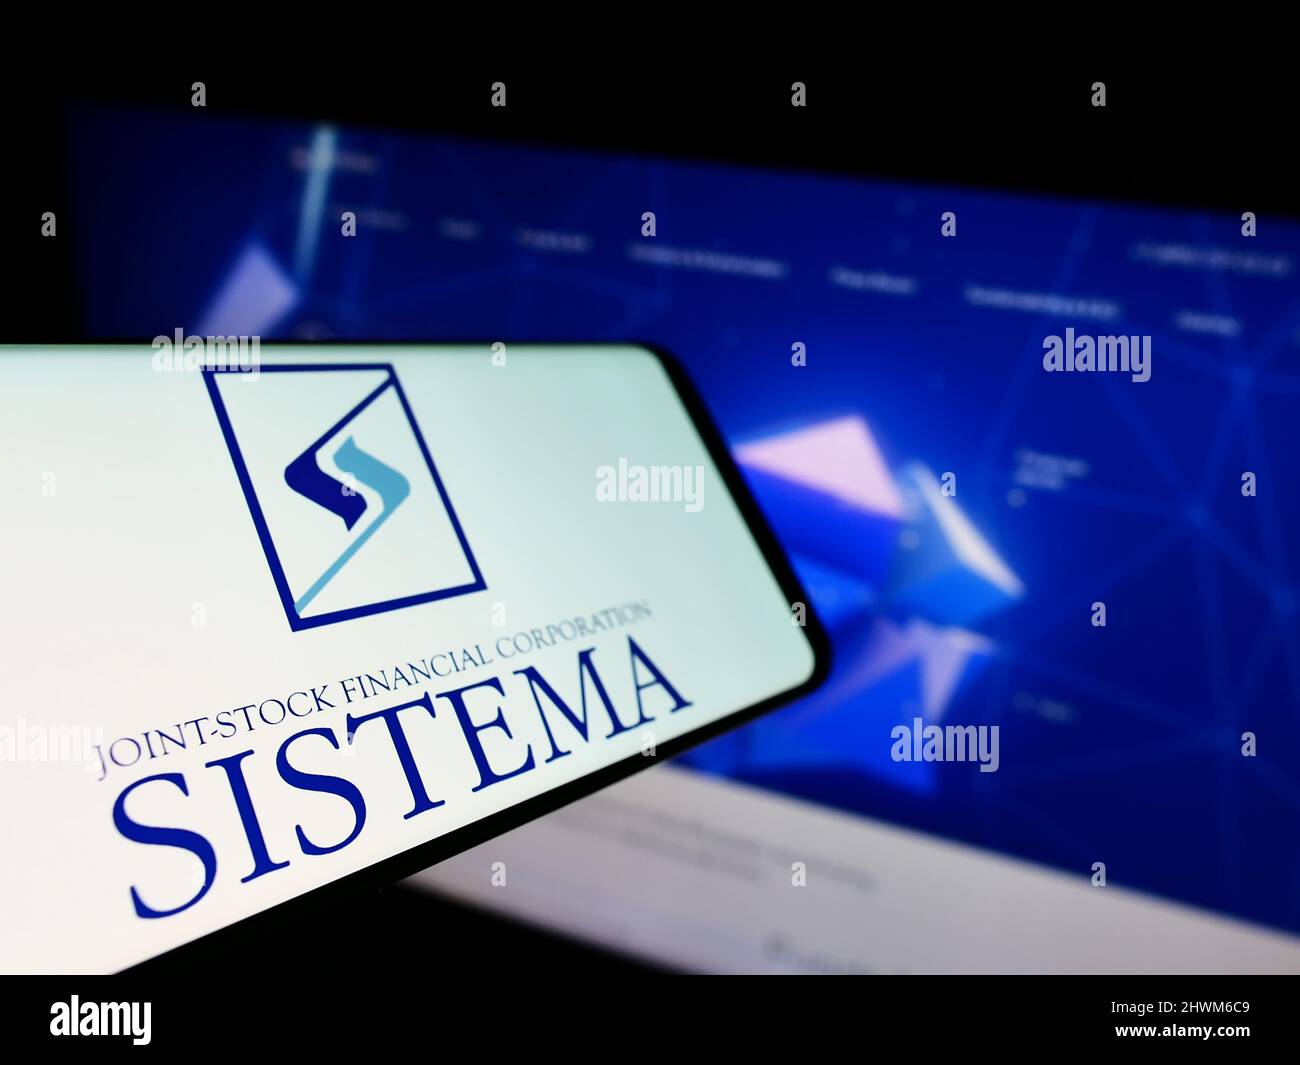 Mobile phone with logo of Russian conglomerate AFK Sistema PAO on screen in front of company website. Focus on center-left of phone display. Stock Photo